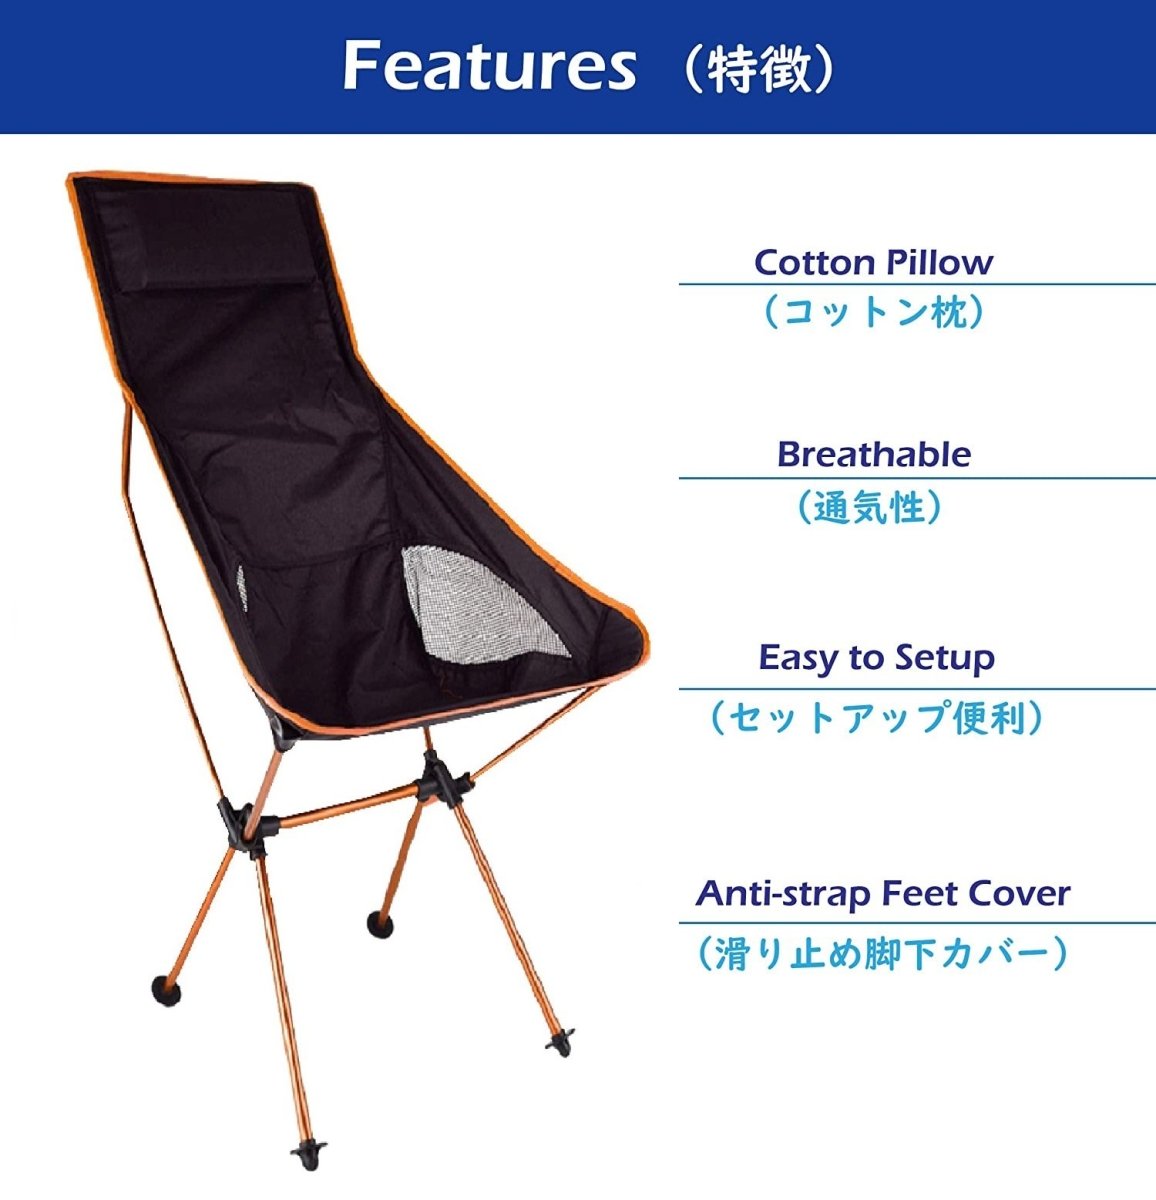 Camping Chair Folding High Back Backpacking Chair, Lightweight Portable Compact For Outdoor Camp